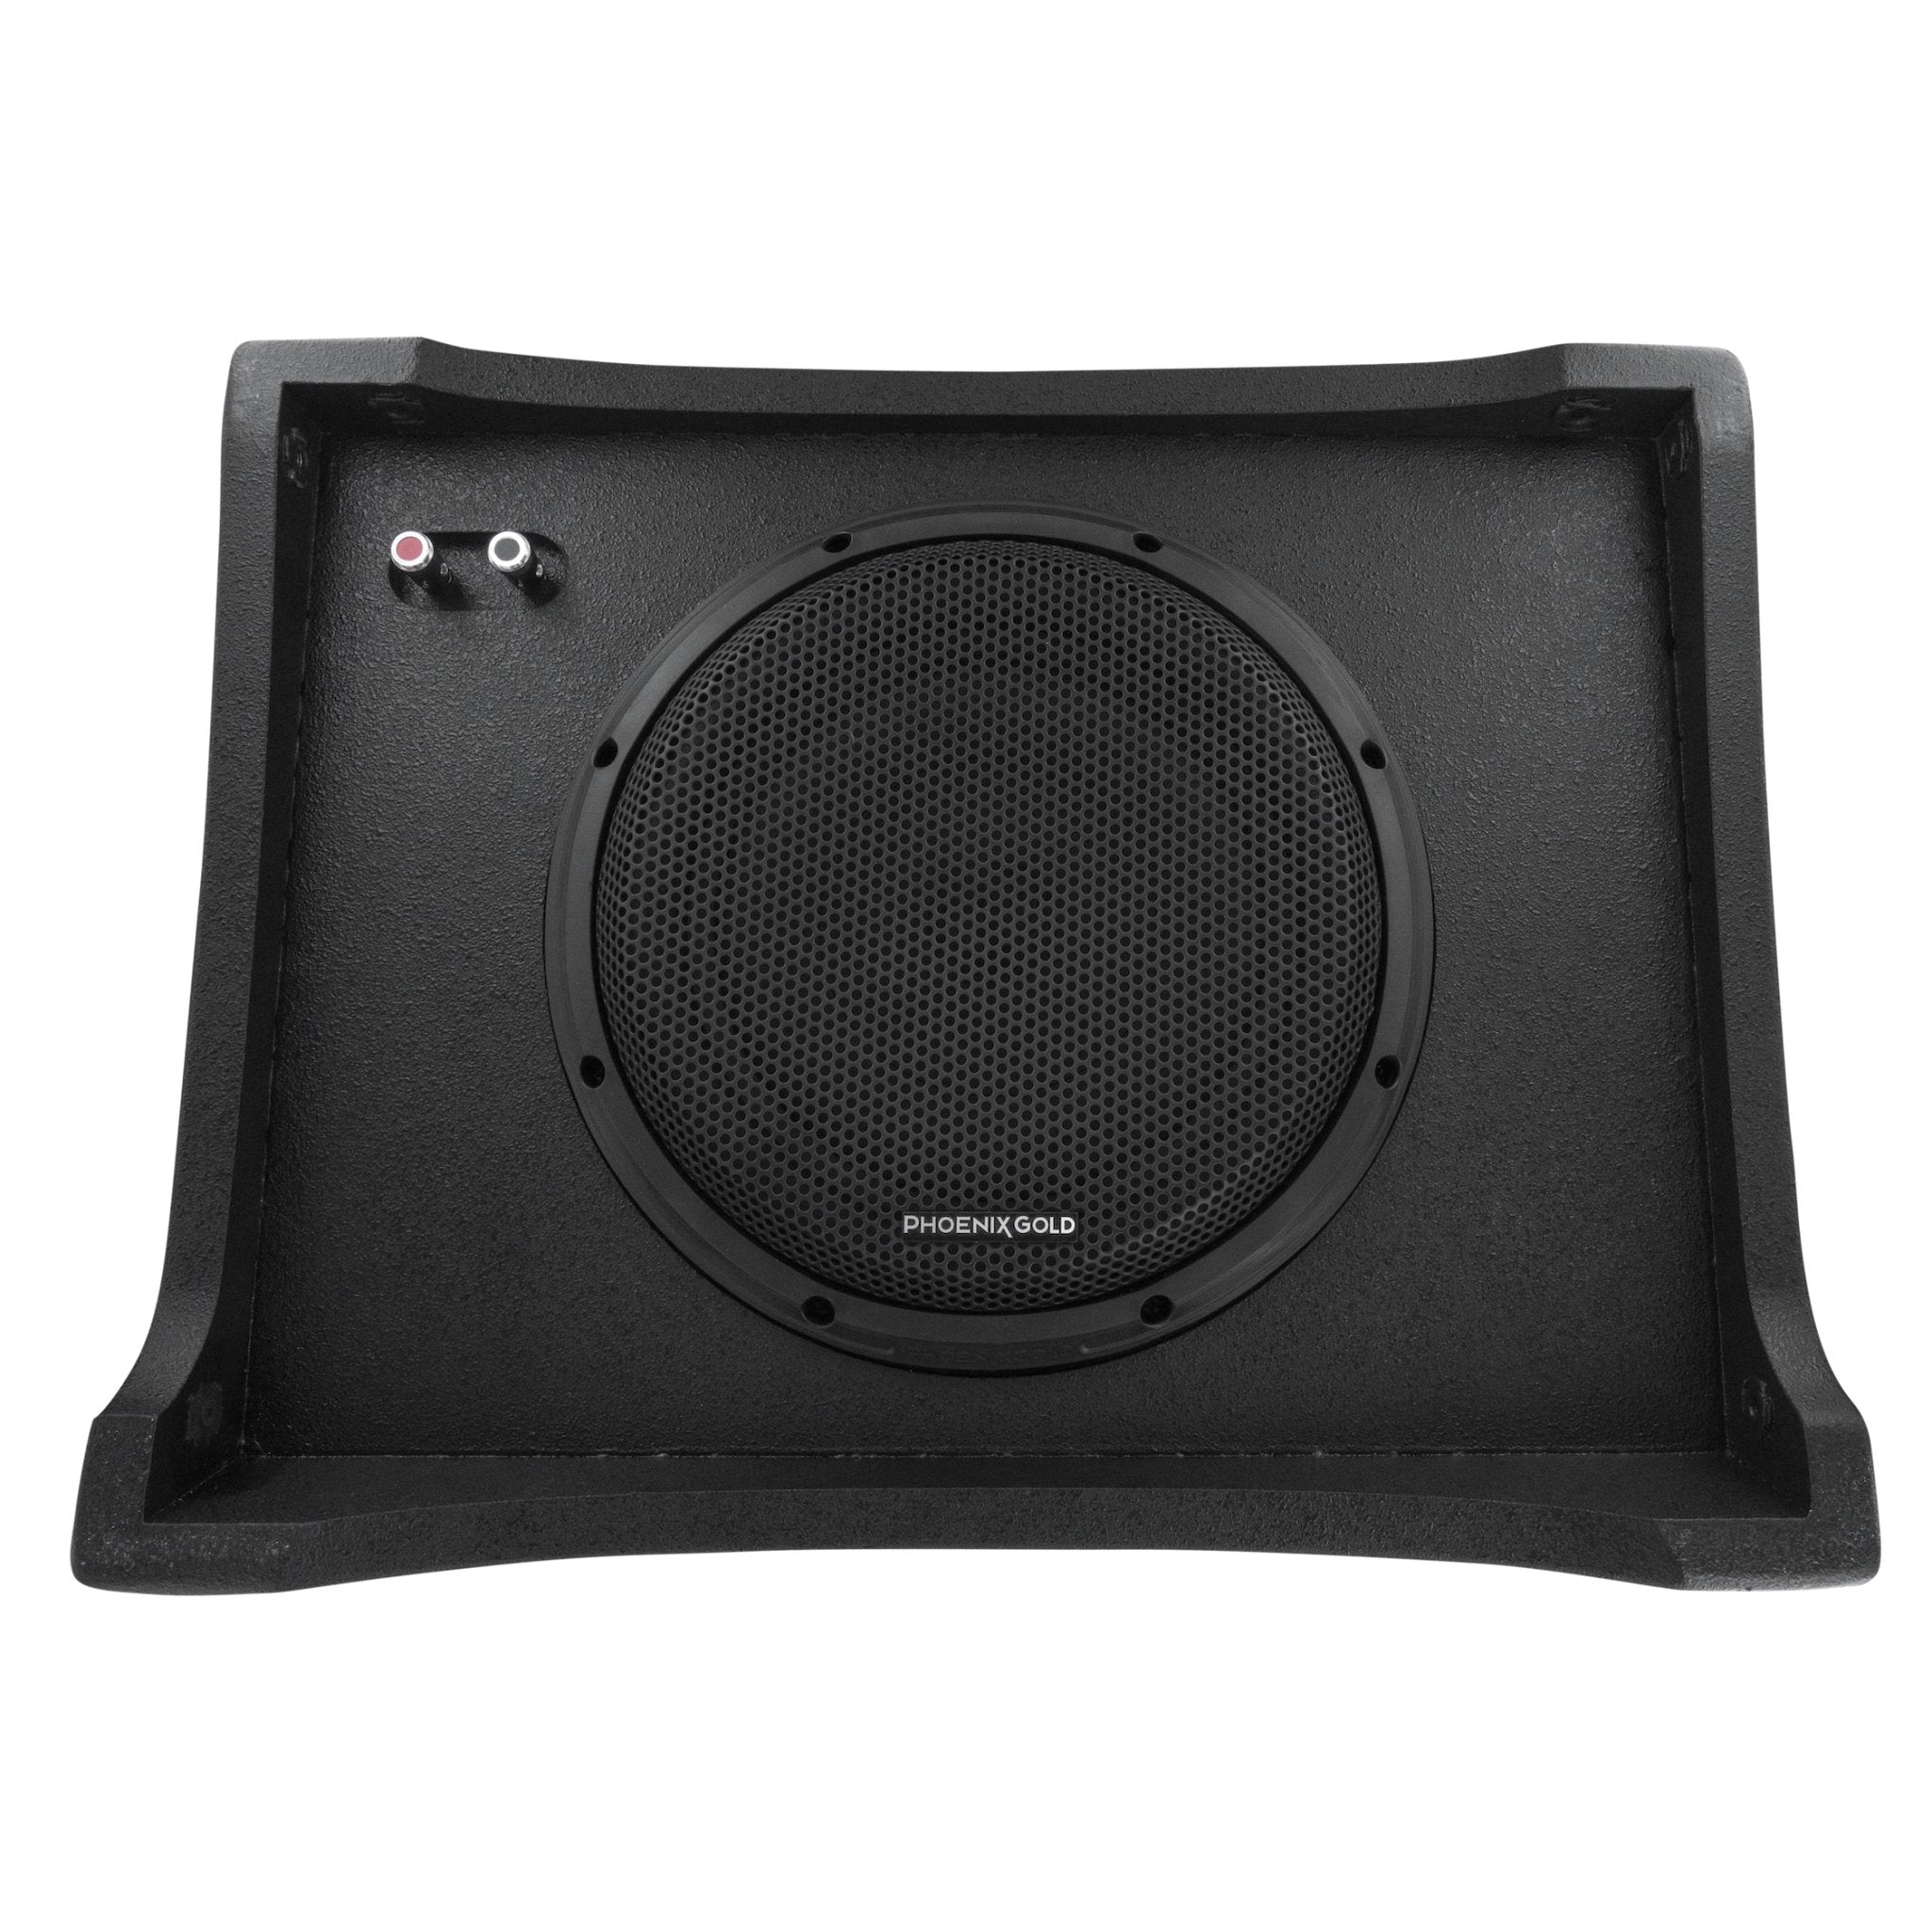 10" 400 Watt (RMS) Under Seat Subwoofer Enclosure (400 Watts RMS/800 Watts Max) for Chevy/GMC, Ford, & Toyota Trucks